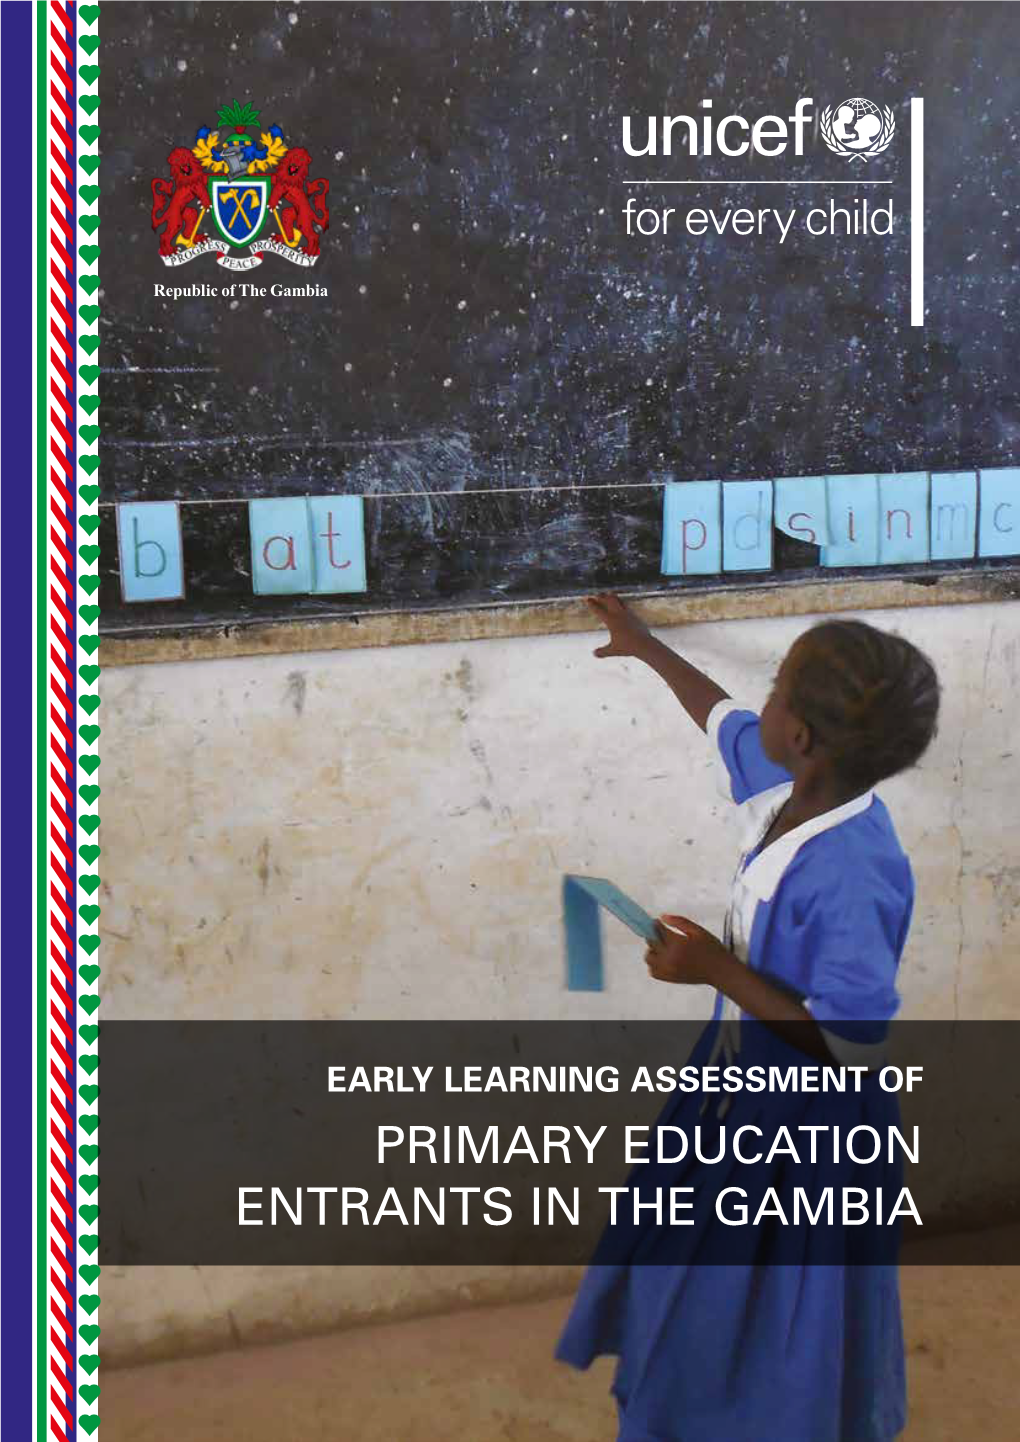 Early Learning Assessment of Primary Education Entrants in the Gambia